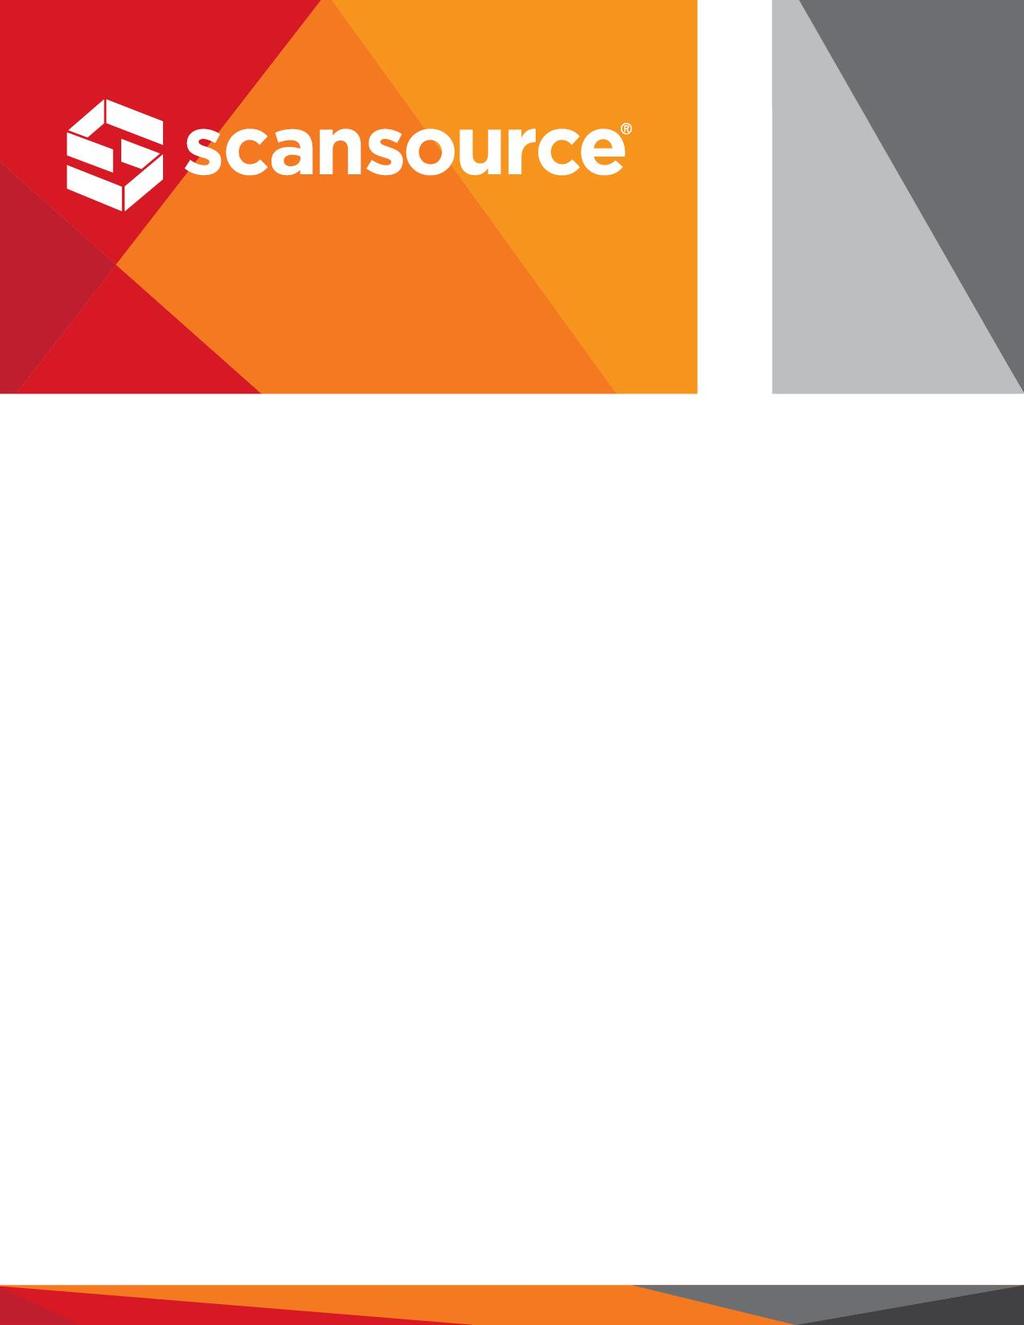 Q4 FY 2018 FINANCIAL INFORMATION AND CONFERENCE CALL Please see the accompanying earnings press release available at www.scansource.com in the Investor Relations section.